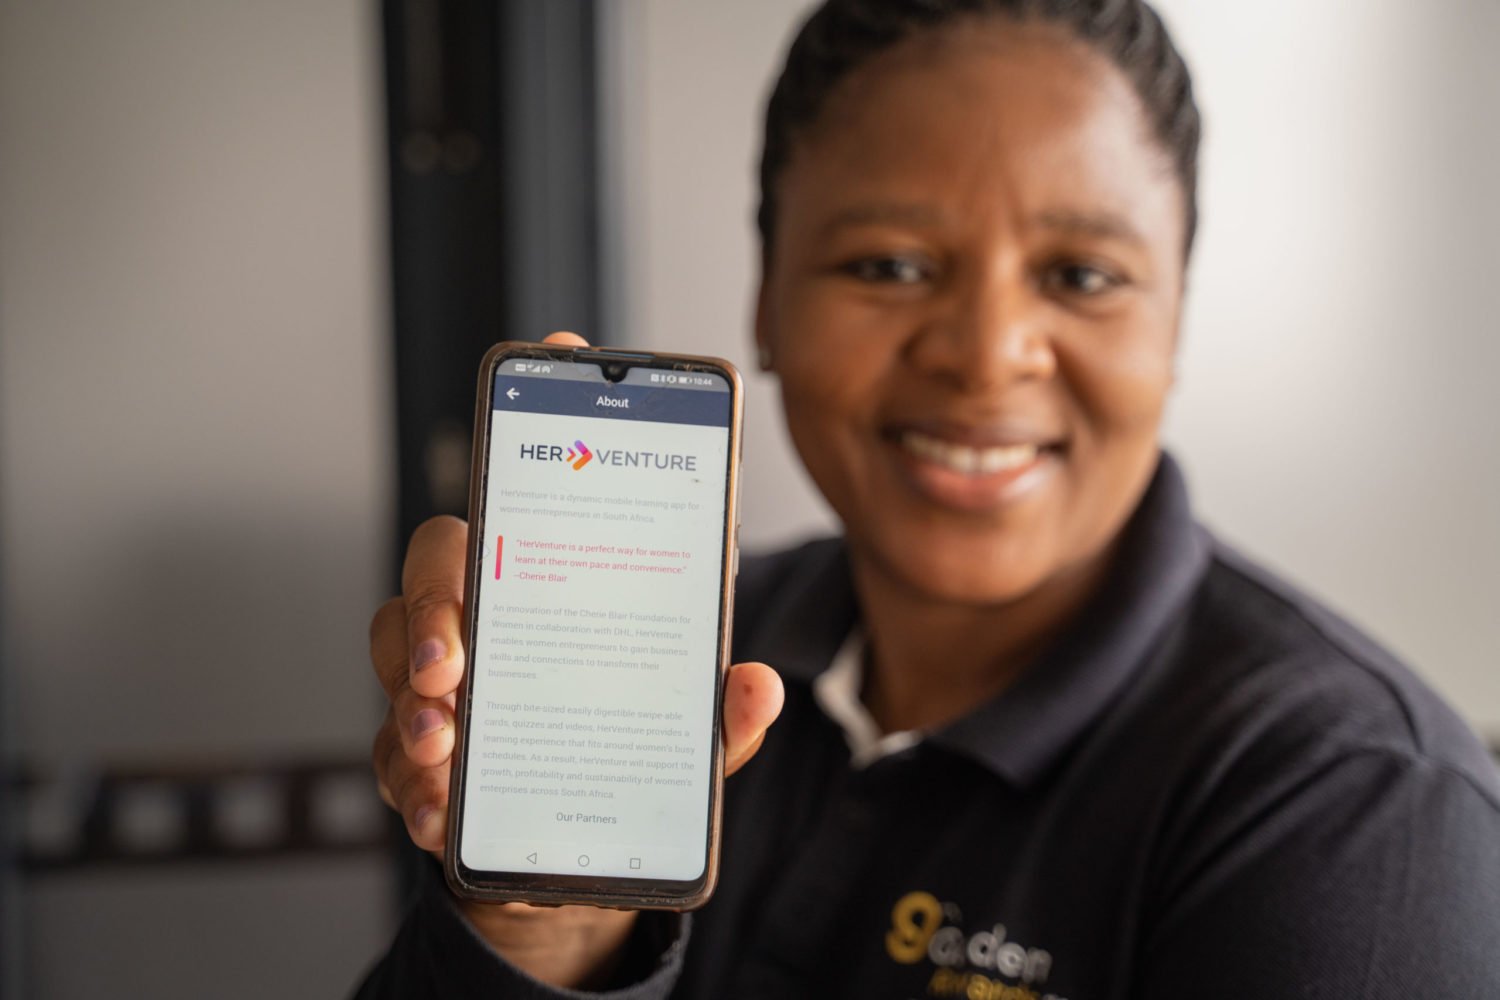 Mampho Sotshongaye, founder and managing director of Golden Rewards 1981, poses for a photograph with the HerVenture App in Cape Town, South Africa, on 28 February 2022. The Cherie Blair Foundation for Women continues to help release the potential of women entrepreneurs in low and middle income countries and close the global gender gap in entrepreneurship.